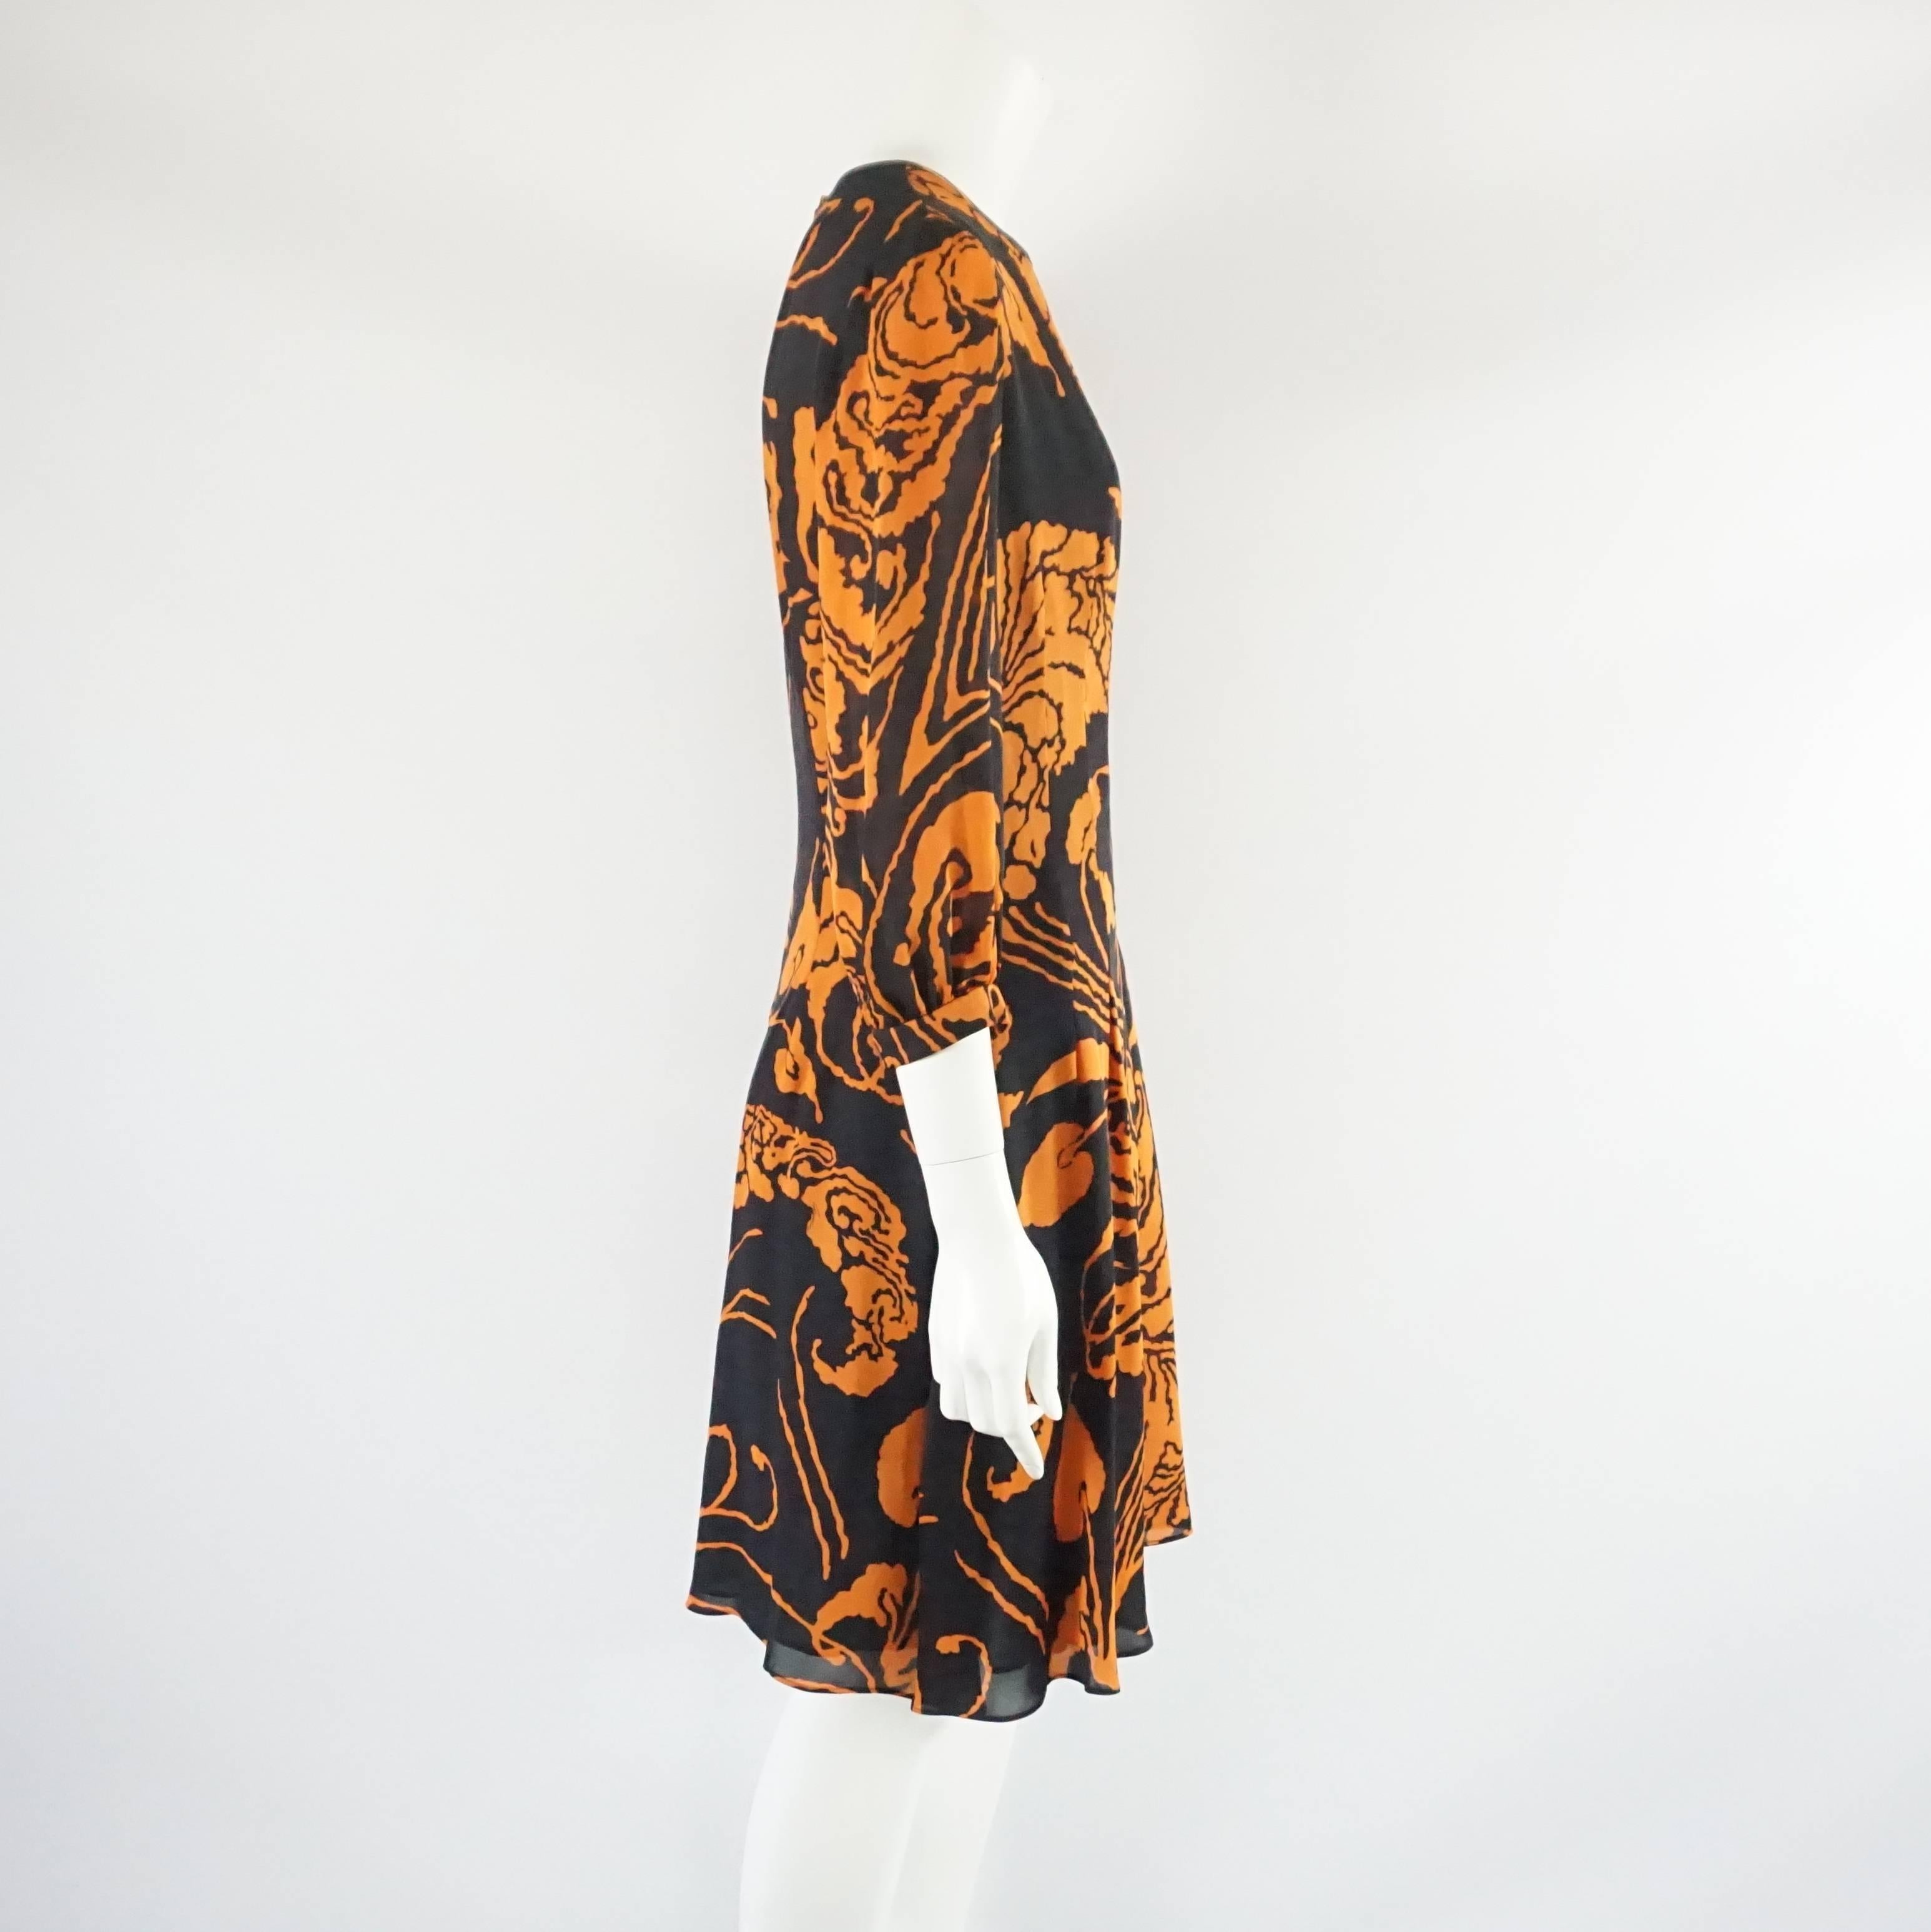 This Gucci dress has a beautiful orange and black abstract print on it. The dress has a round neck with 3/4 puffed sleeves and Gucci emblem cuff buttons. It also has pleated along the skirt and a back zipper. The piece is in excellent condition with